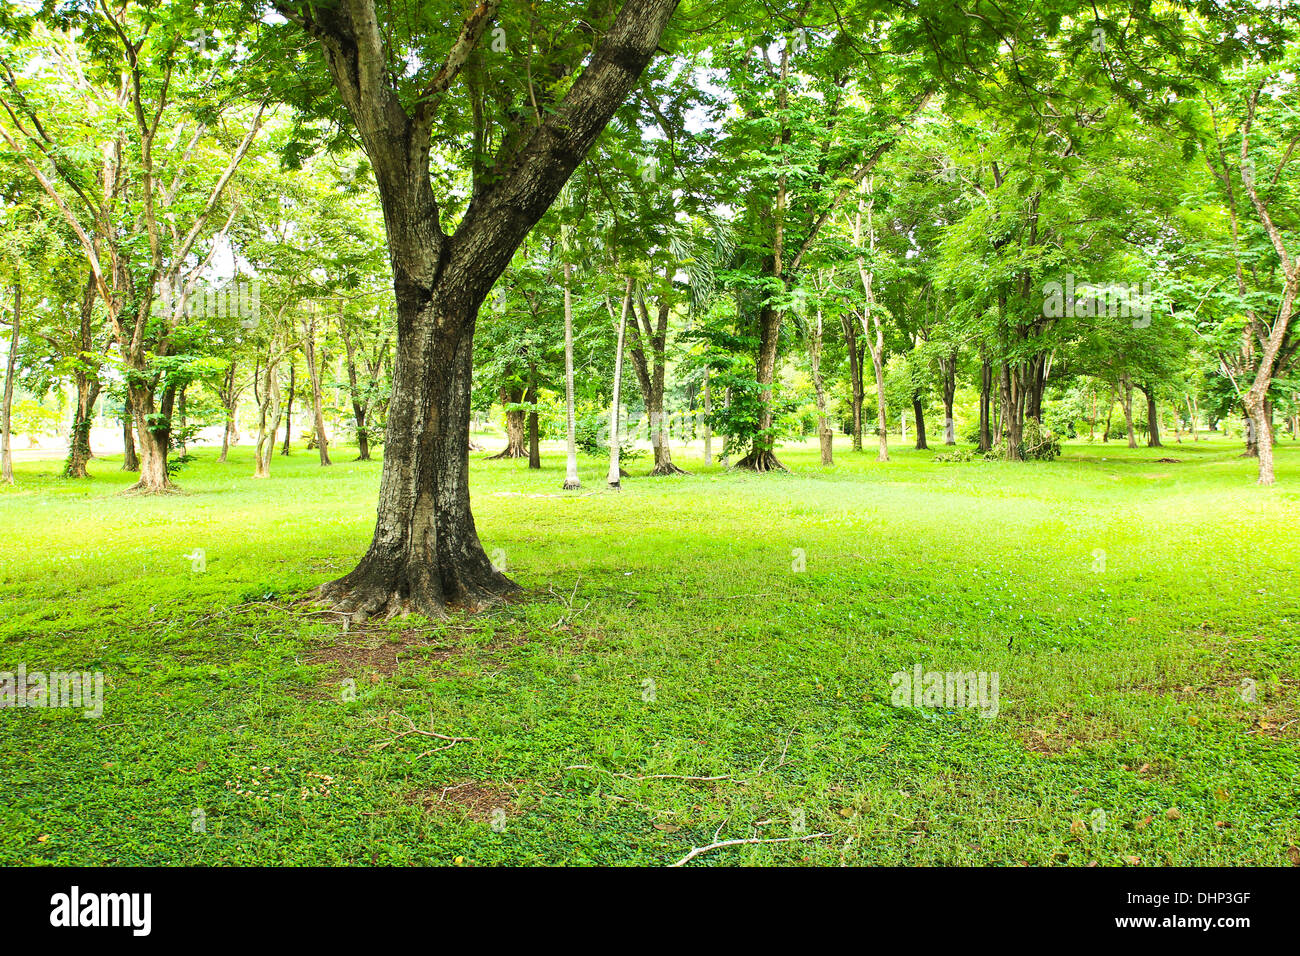 Green trees in park Stock Photo